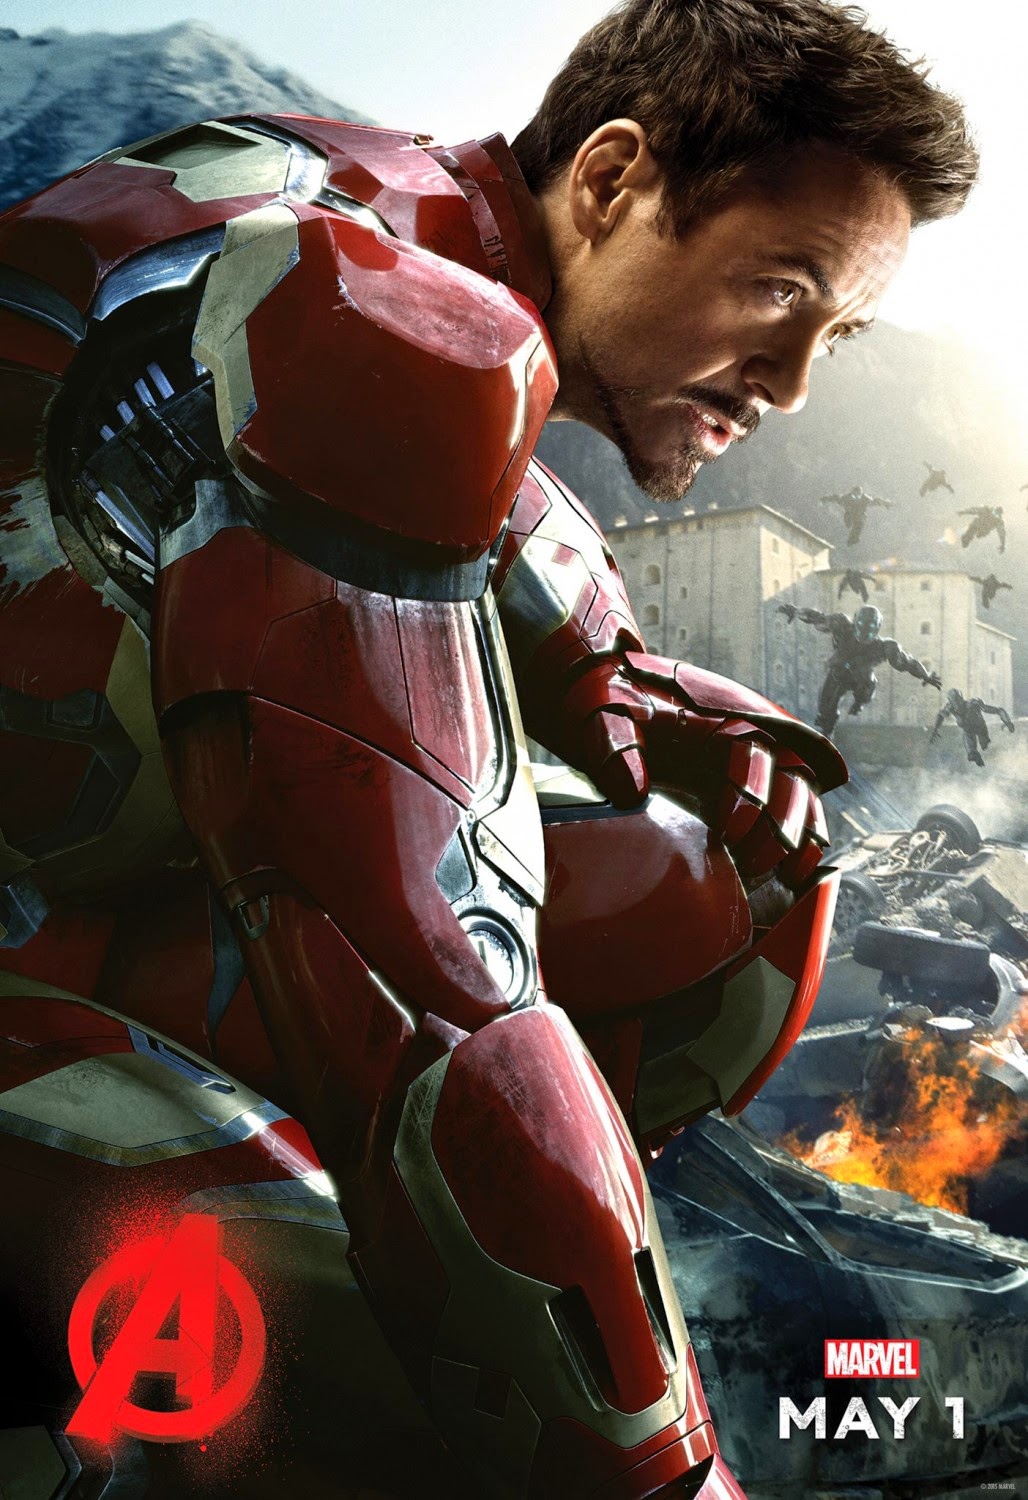 Marvel’s Avengers Age of Ultron Character Movie Poster Set - Robert Downey, Jr. as Iron Man